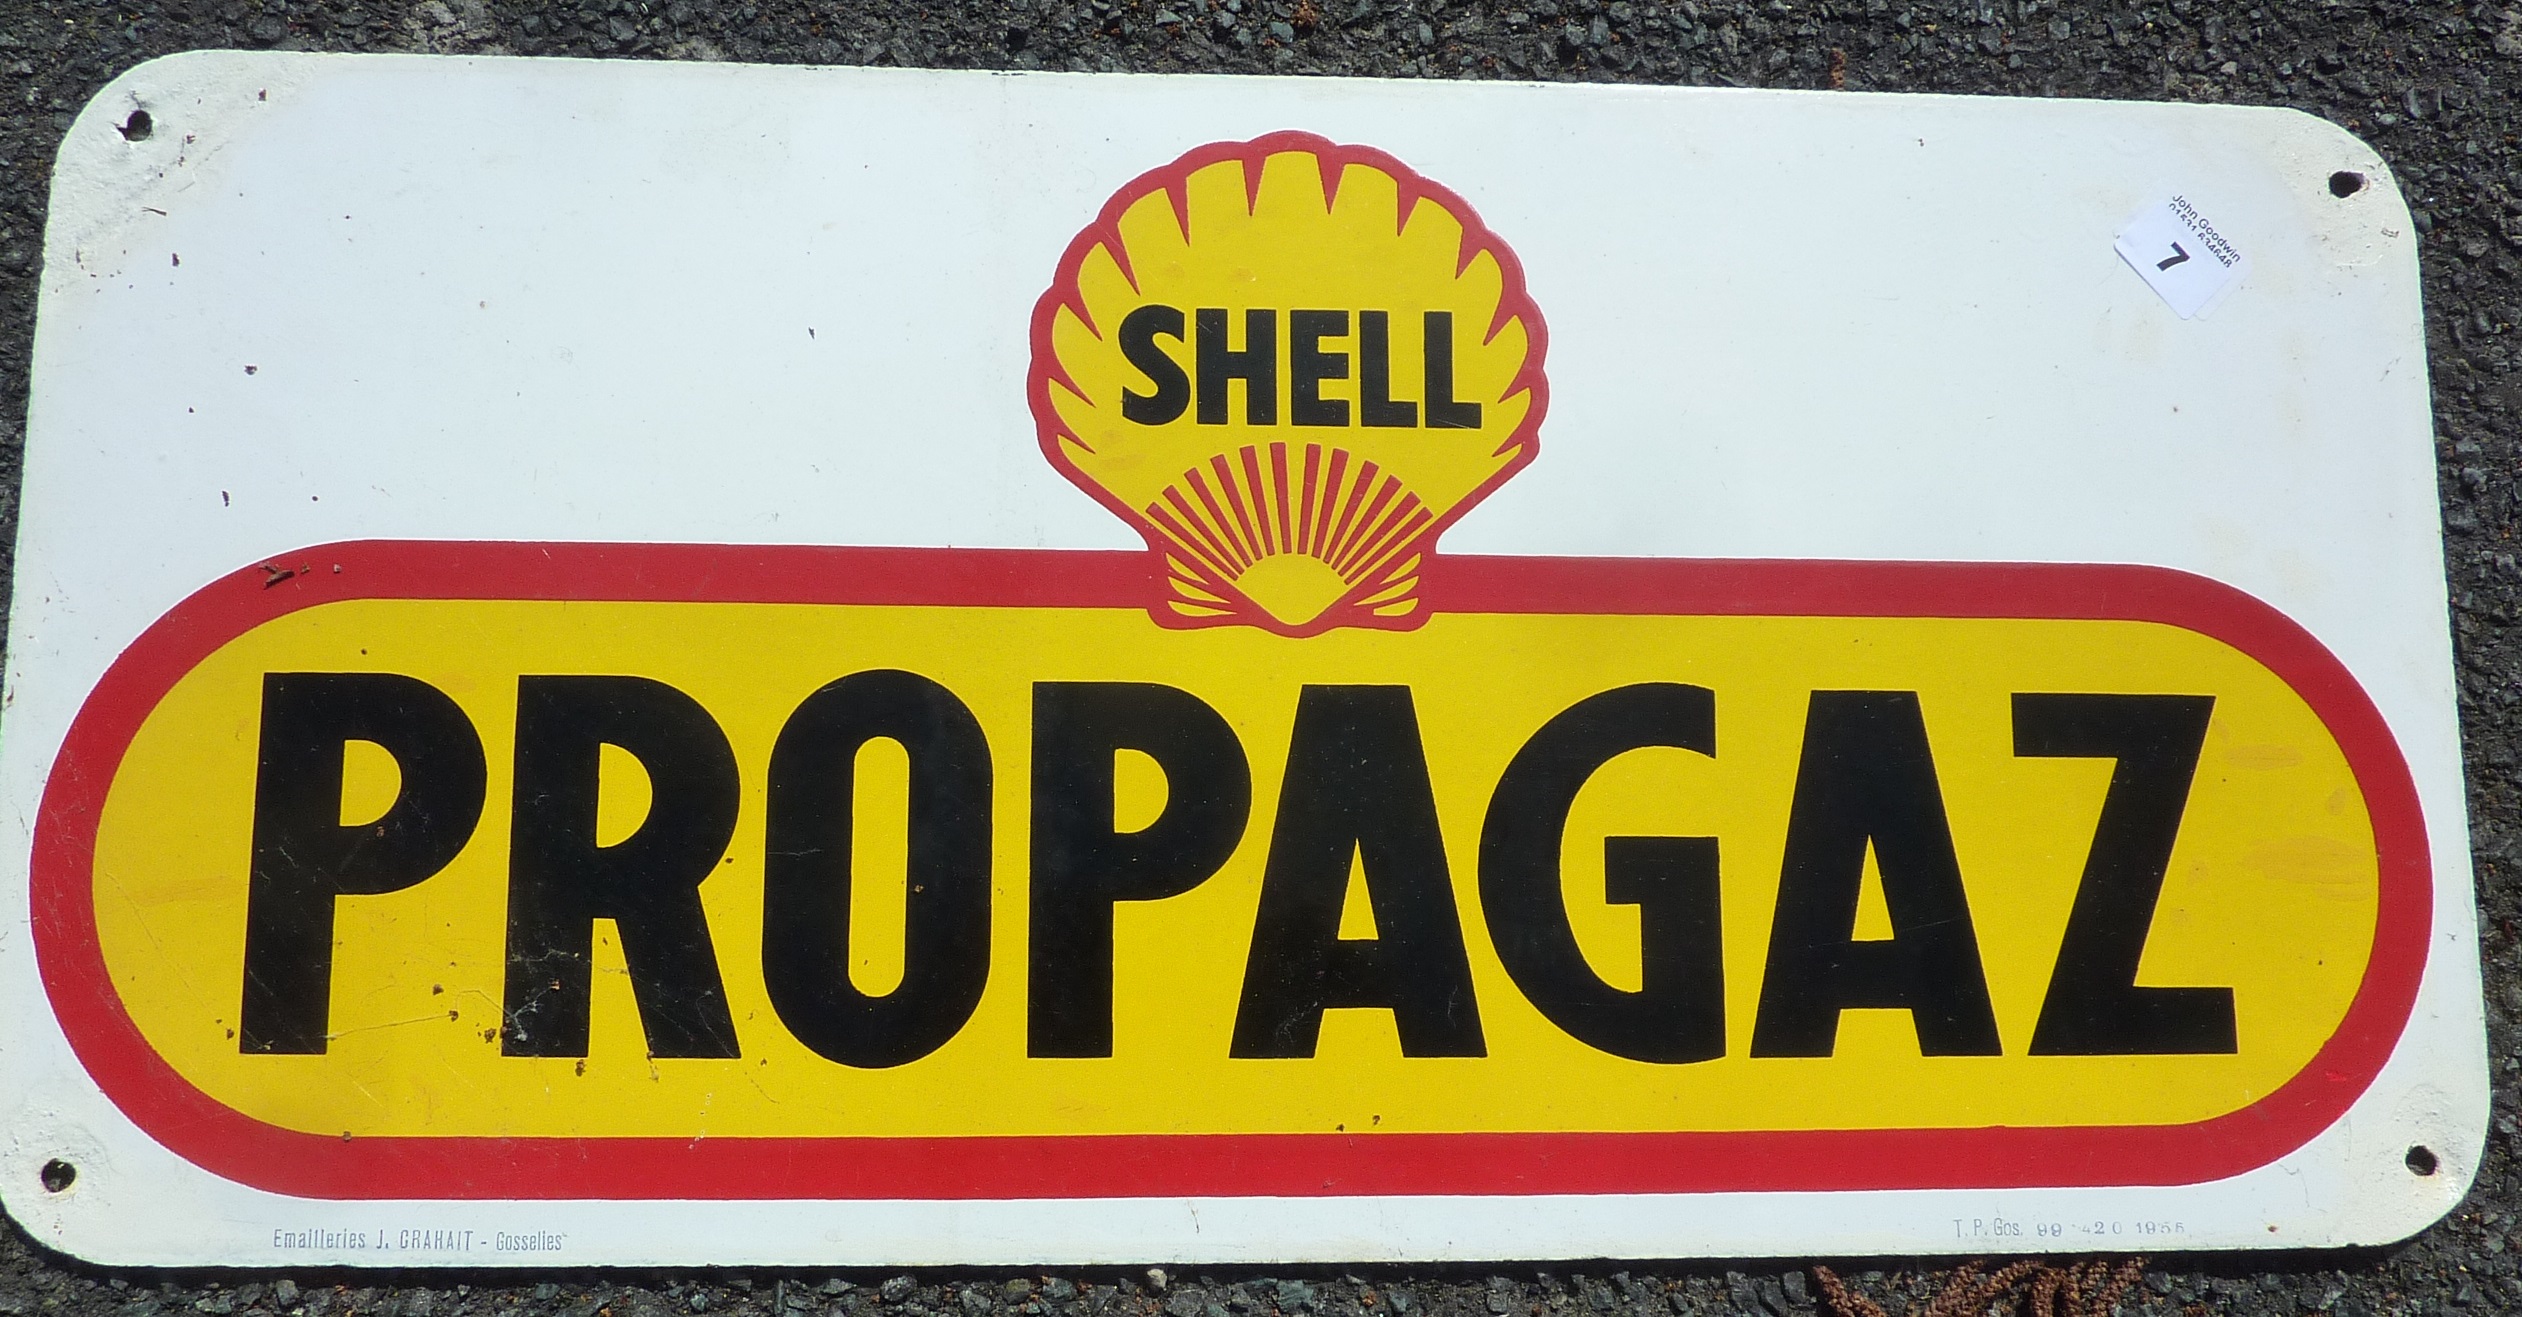 ADVERTISING SIGN SHELL PROPAGAL DOUBLE SIDED ADVERTISING SIGN APPROX 26 INS X 13 INS TP GOS 9420